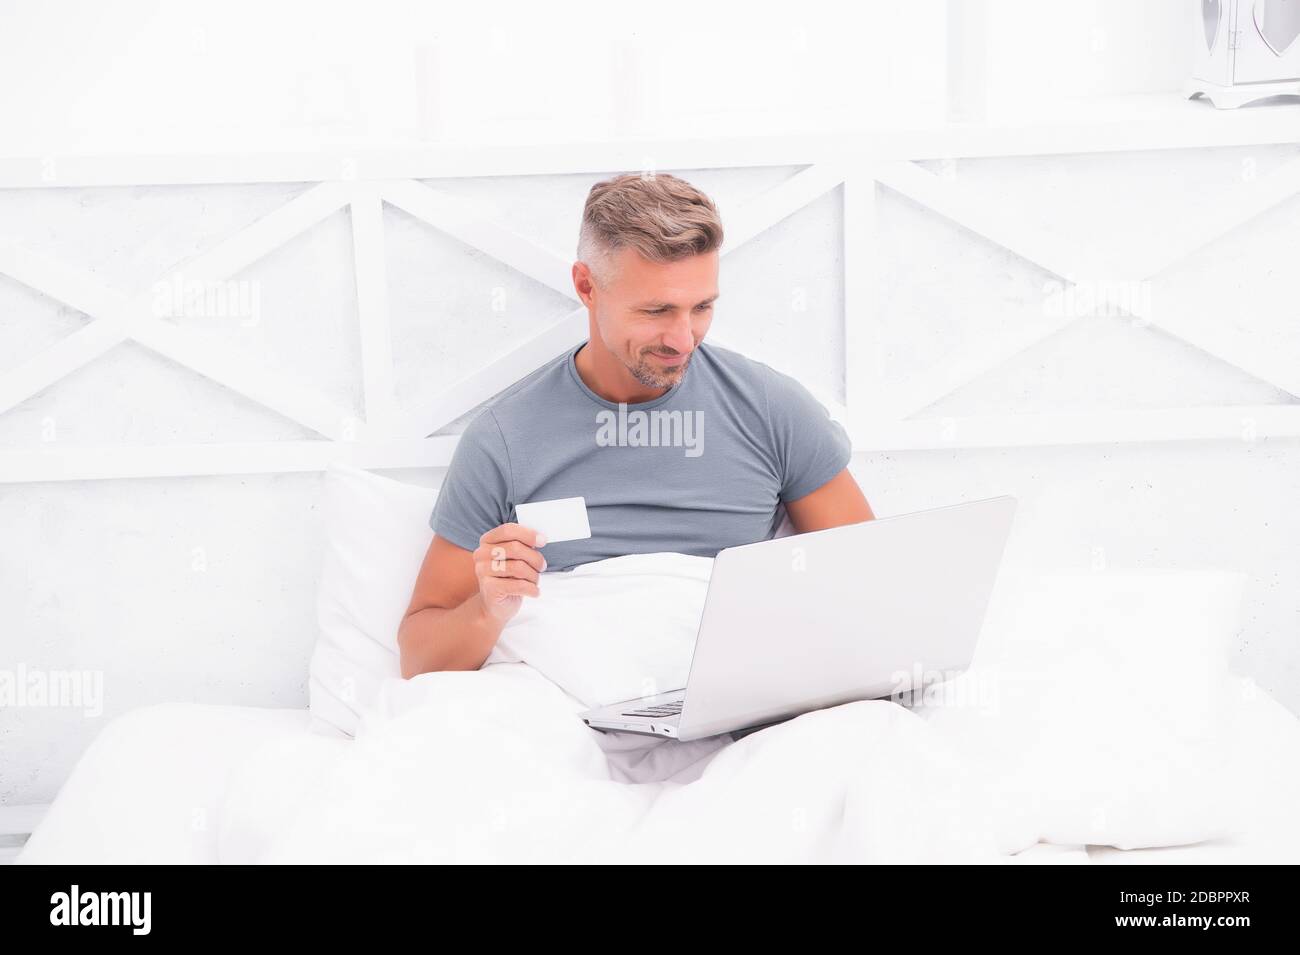 Payment and purchase. Online shopping. Work from home. Checking messages. Mature guy pajamas in bed. Businessman with computer. Hipster work on laptop. Bedroom rest. Remote job. Online communication. Stock Photo